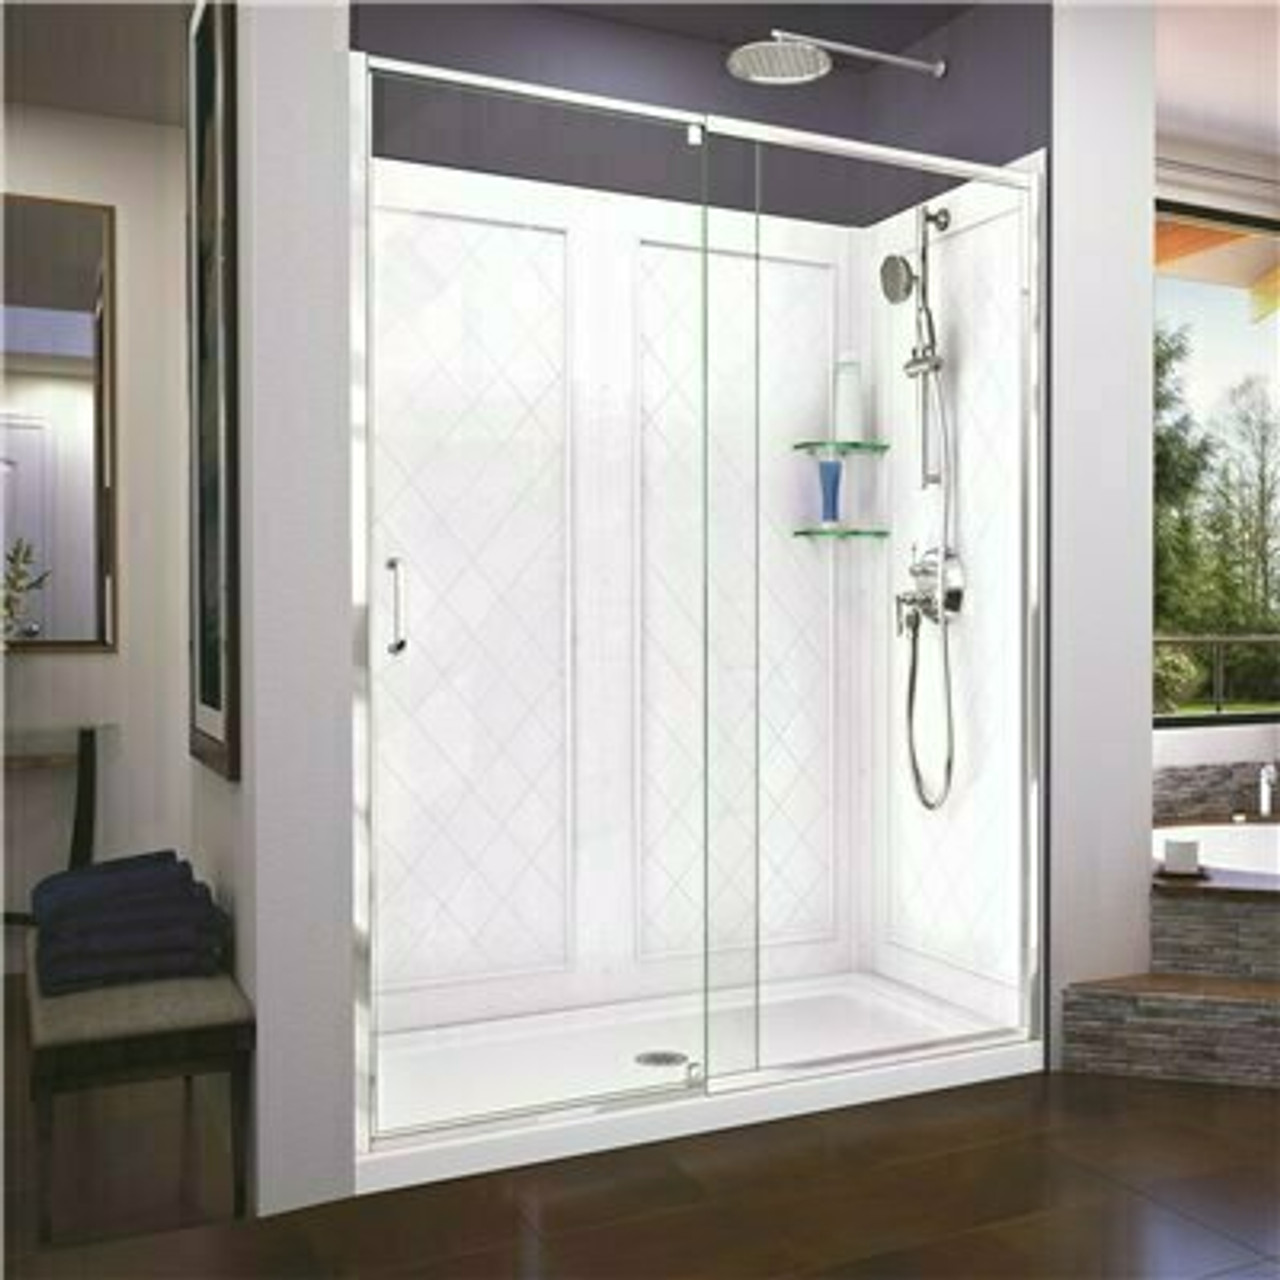 Flex 60 In. W X 32 In. D X 76.75 In. Framed Pivot Shower Door In Chrome With Center Drain White Base And Backwall Kit